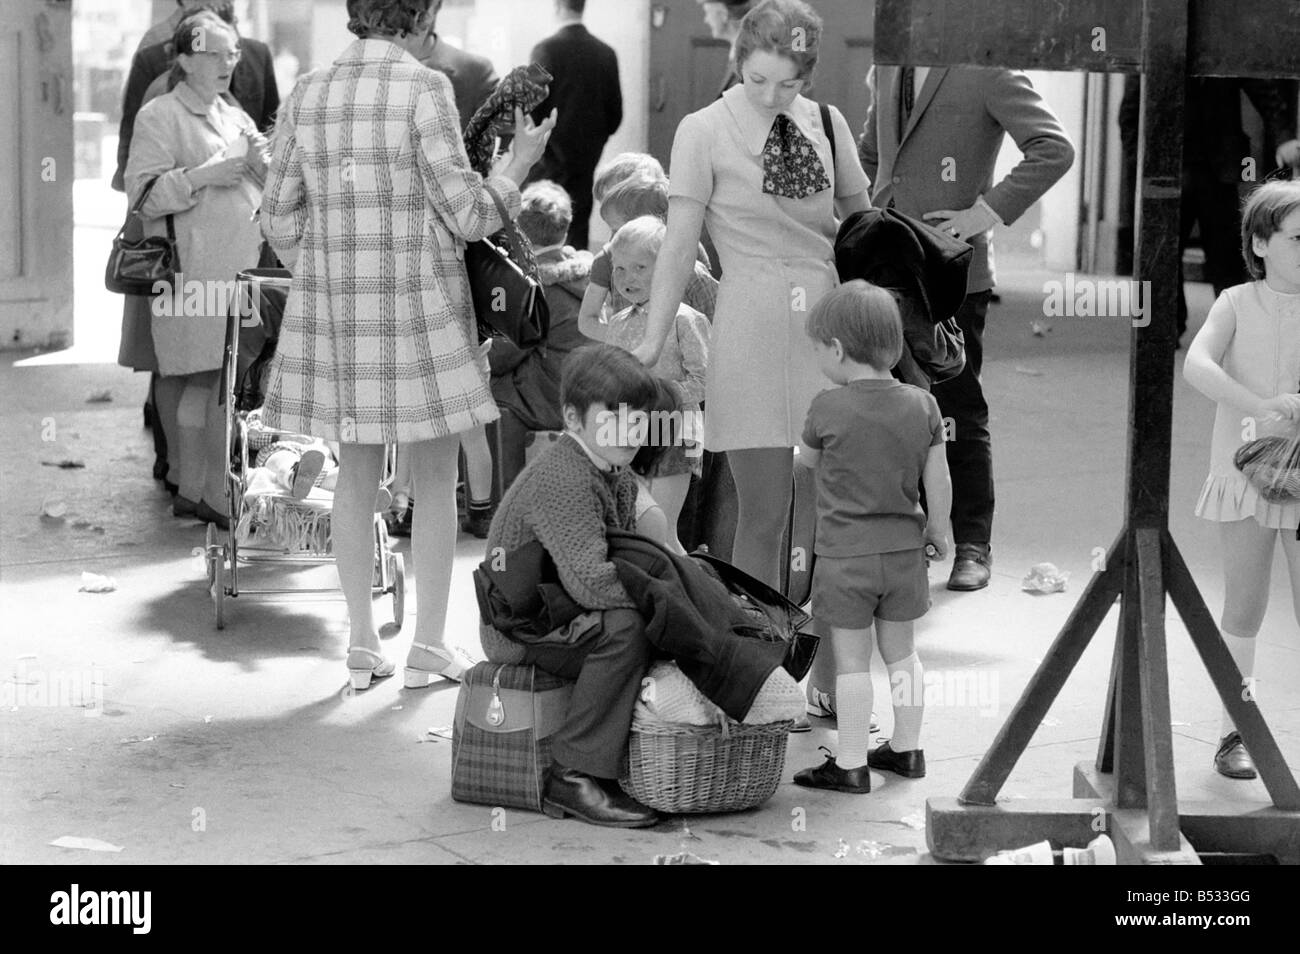 George Phillips, staff. Northern Ireland July 1972. Children waiting for the train in Belfast as families flee from the bombs and bullets. July 1972. July 1972 72-7262-004 Stock Photo